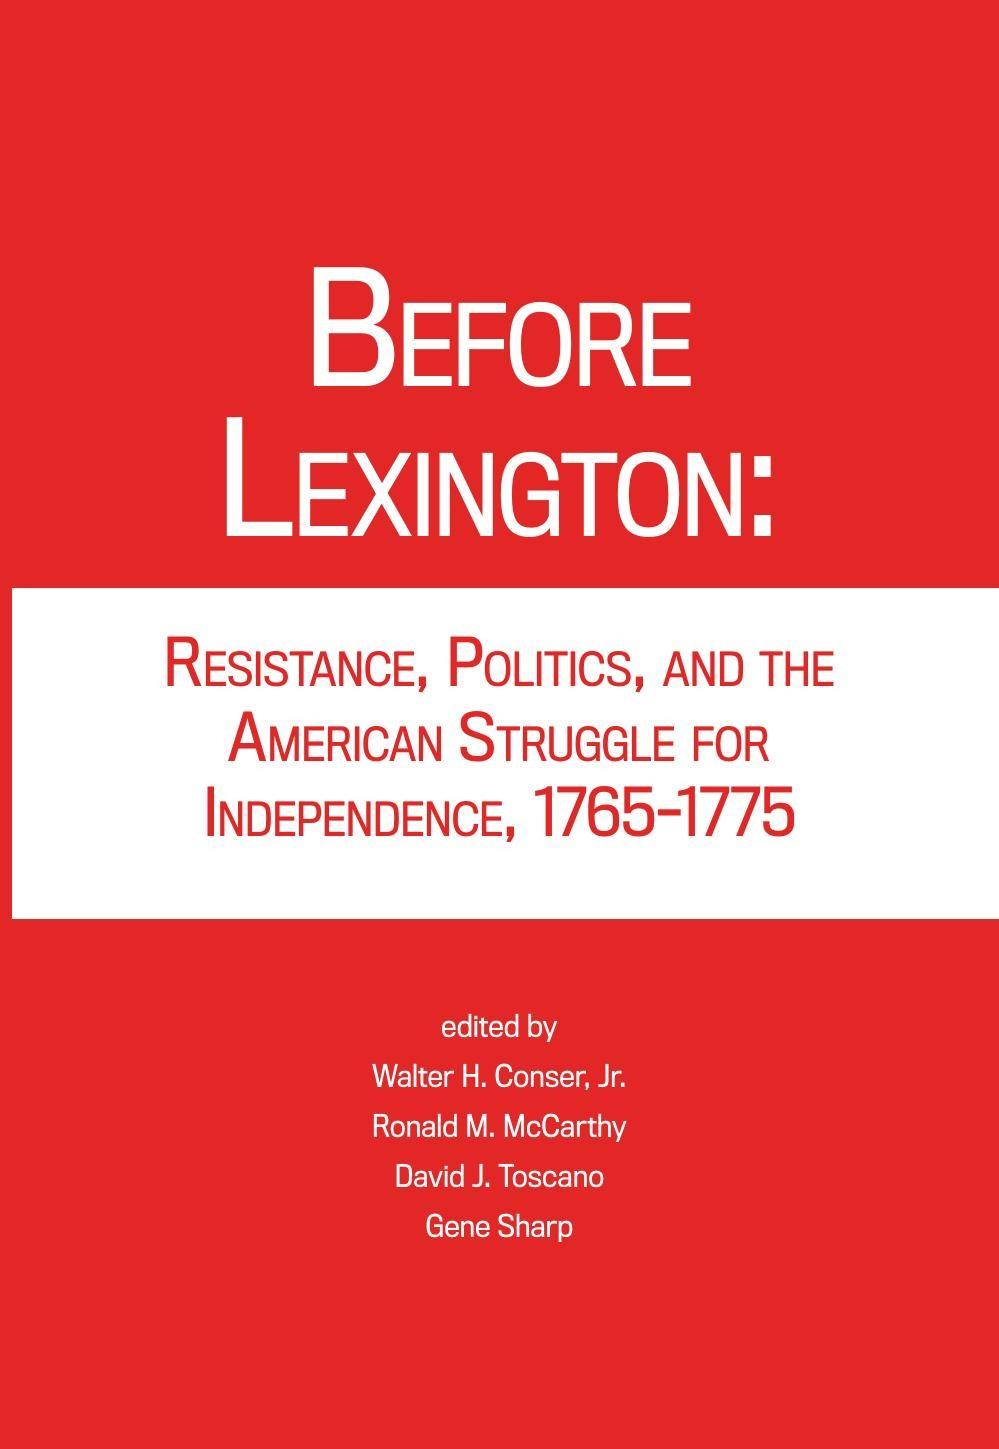 Before Lexington - Resistance, Politics, and the American Struggle for Independence, 1765–1775 (2015) by Walter H. Conser, Jr & Ronald M. McCarthy & David J. Toscano & Gene Sharp